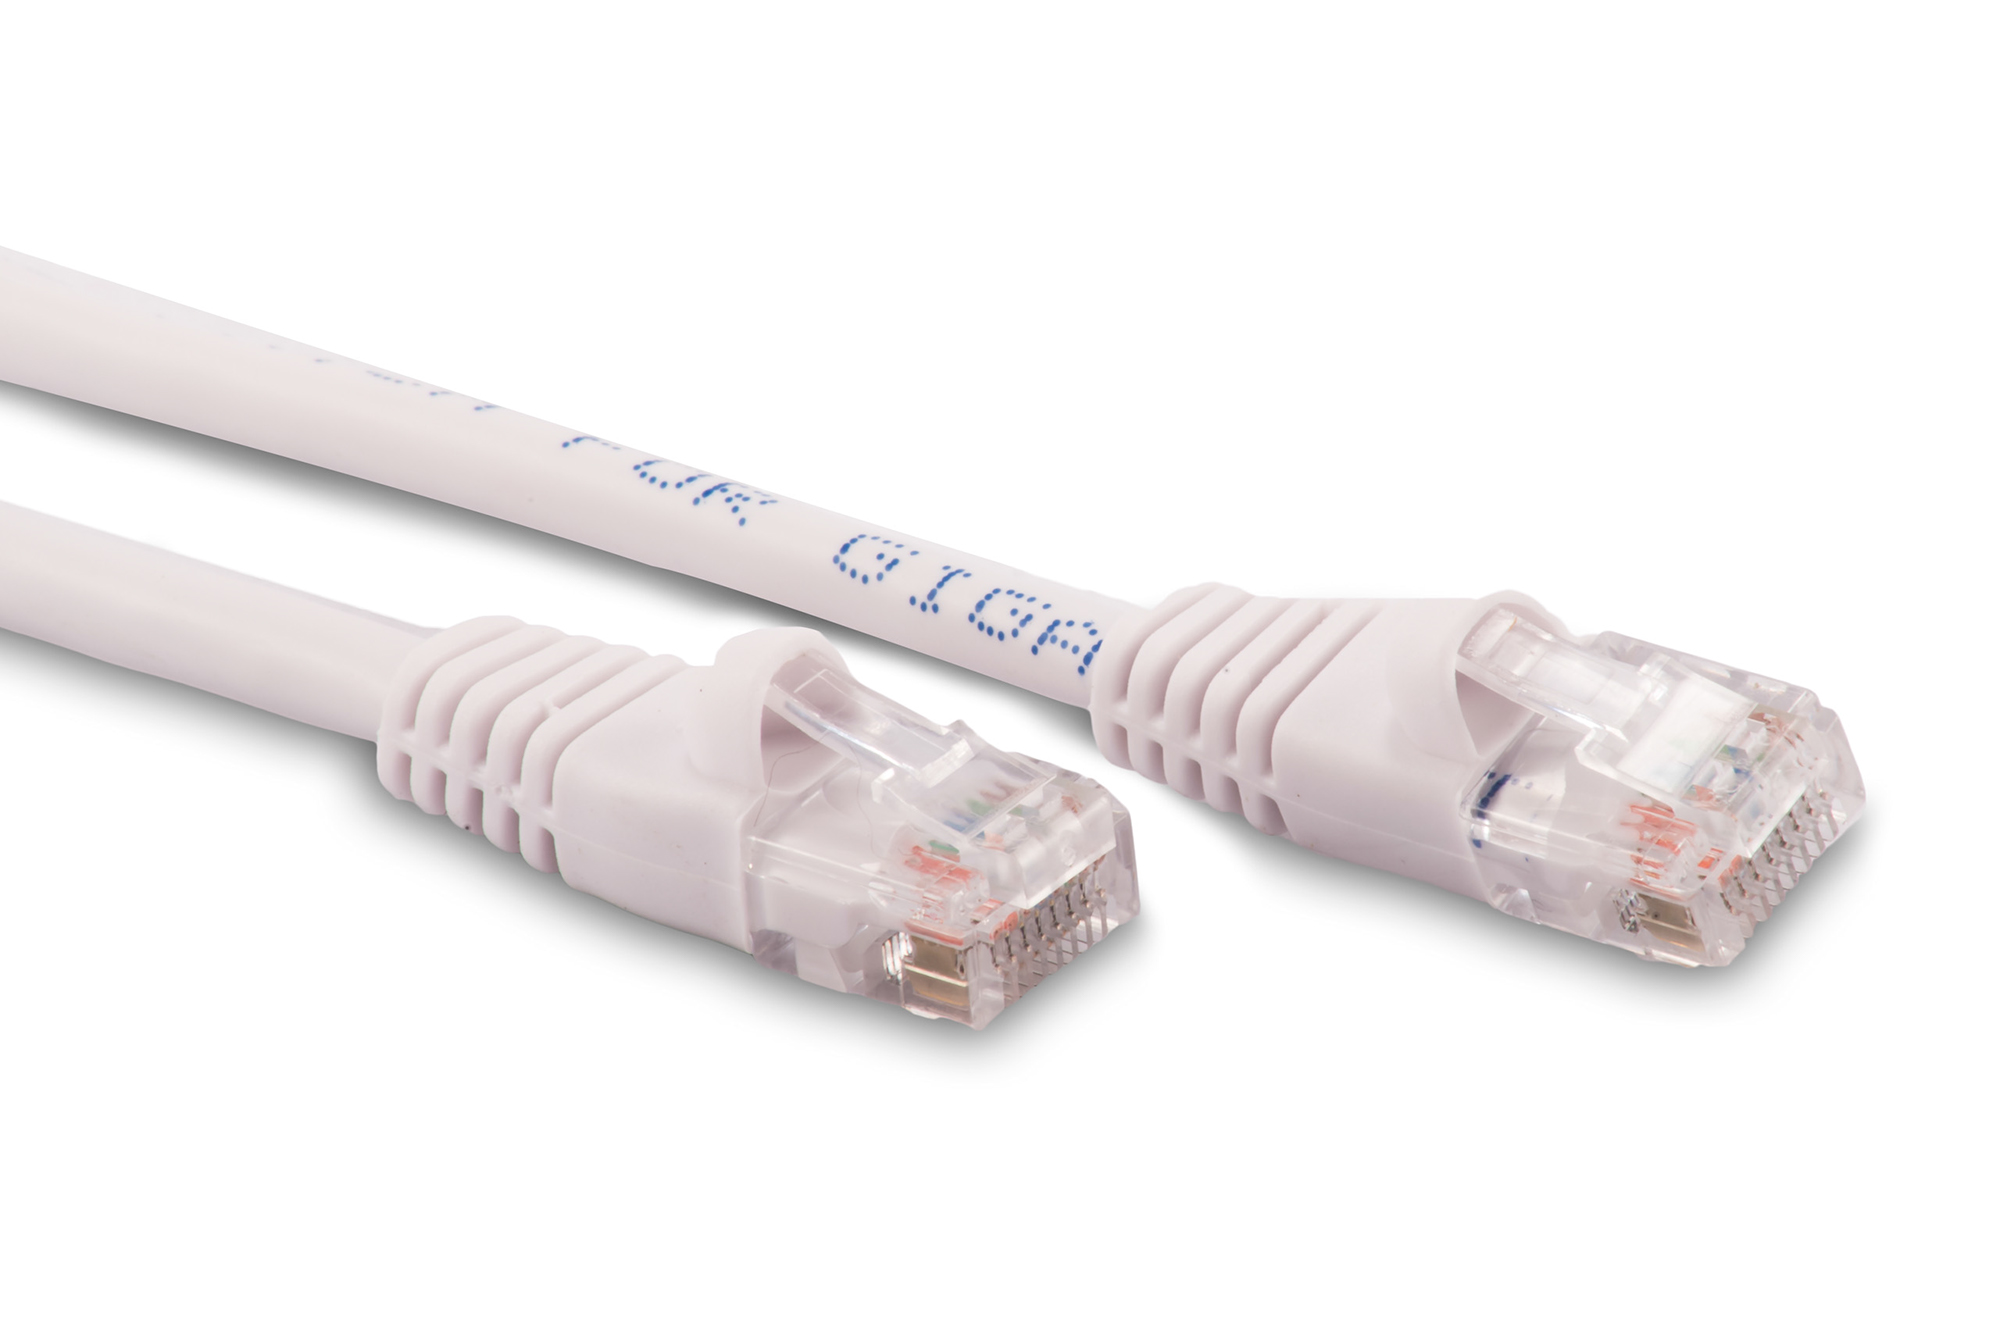 3ft Cat5e Ethernet Patch Cable - White Color - Snagless Boot, Stranded, RJ45, 350Mhz, 24AWG